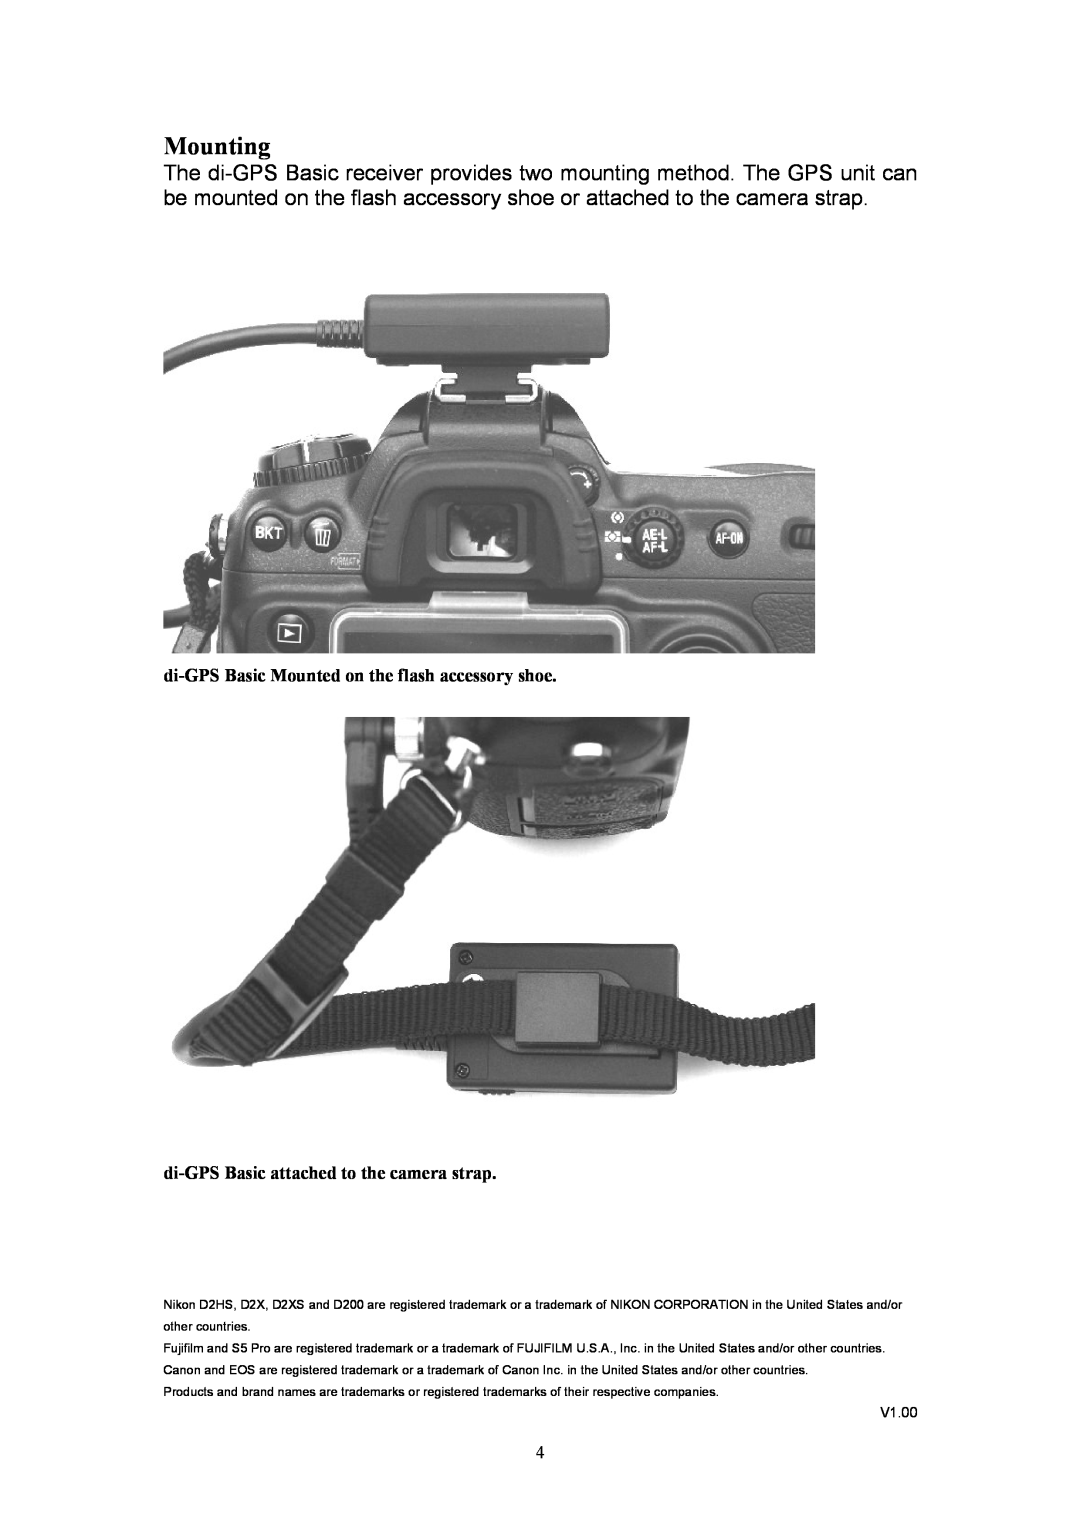 Nikon ver1.00 Mounting, di-GPS Basic Mounted on the flash accessory shoe, di-GPS Basic attached to the camera strap, V1.00 